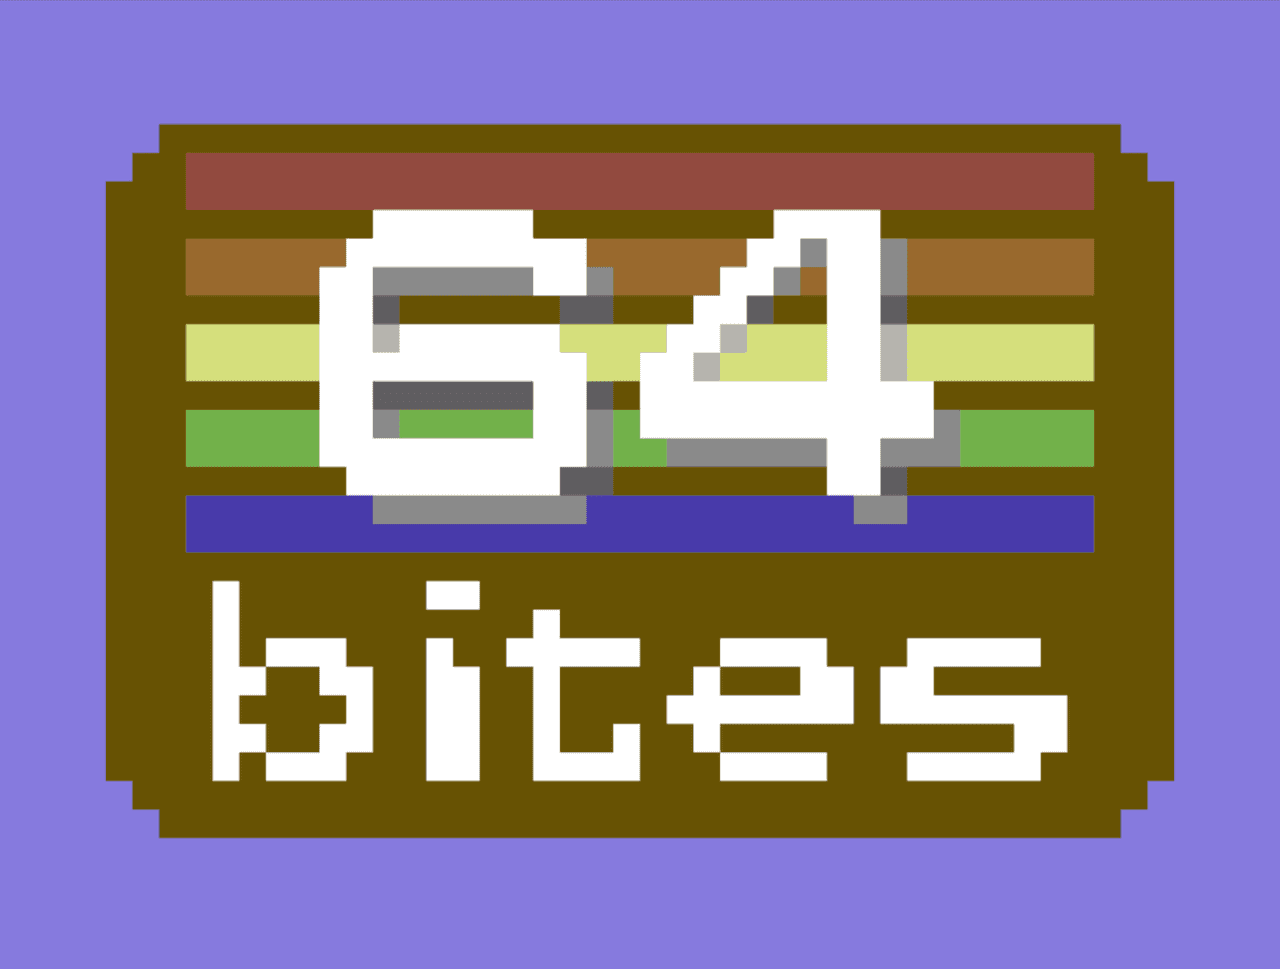 64bites logo made from colored characters